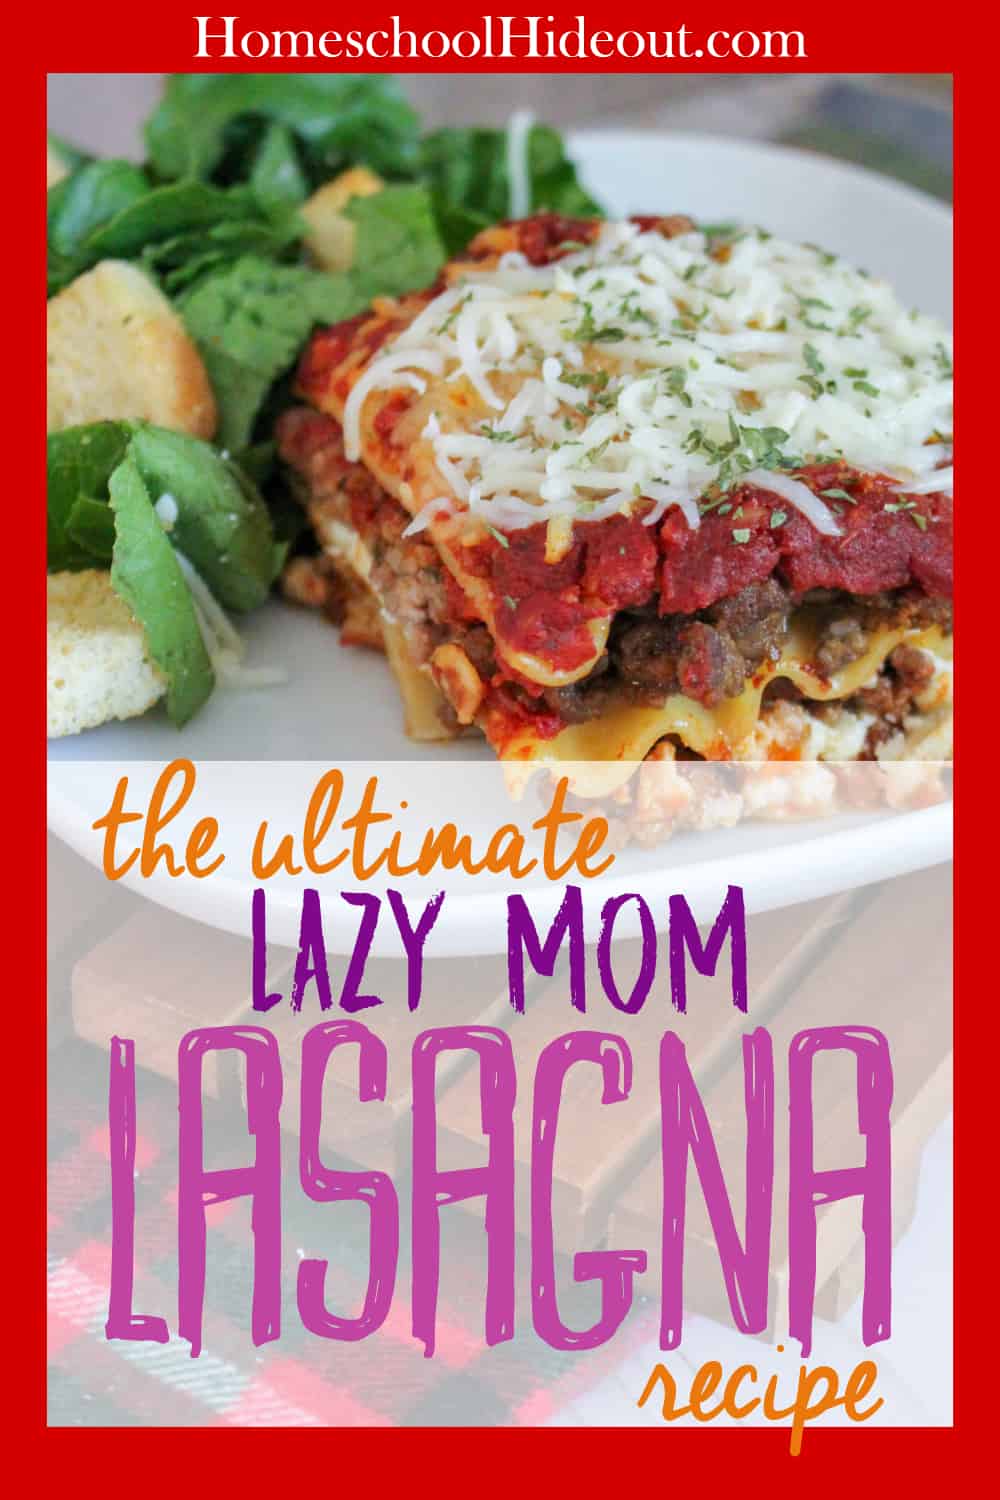 This simple lasagna recipe is easy enough to whip up in under an hour. It's the perfect recipe to double for freezer meals or just make extra and have some dang good leftovers tomorrow! #foodies #easymeals #freezermeals #leftovers #lasagna #bigfamilycooking #mealplanningforlargefamilies #kidapproved